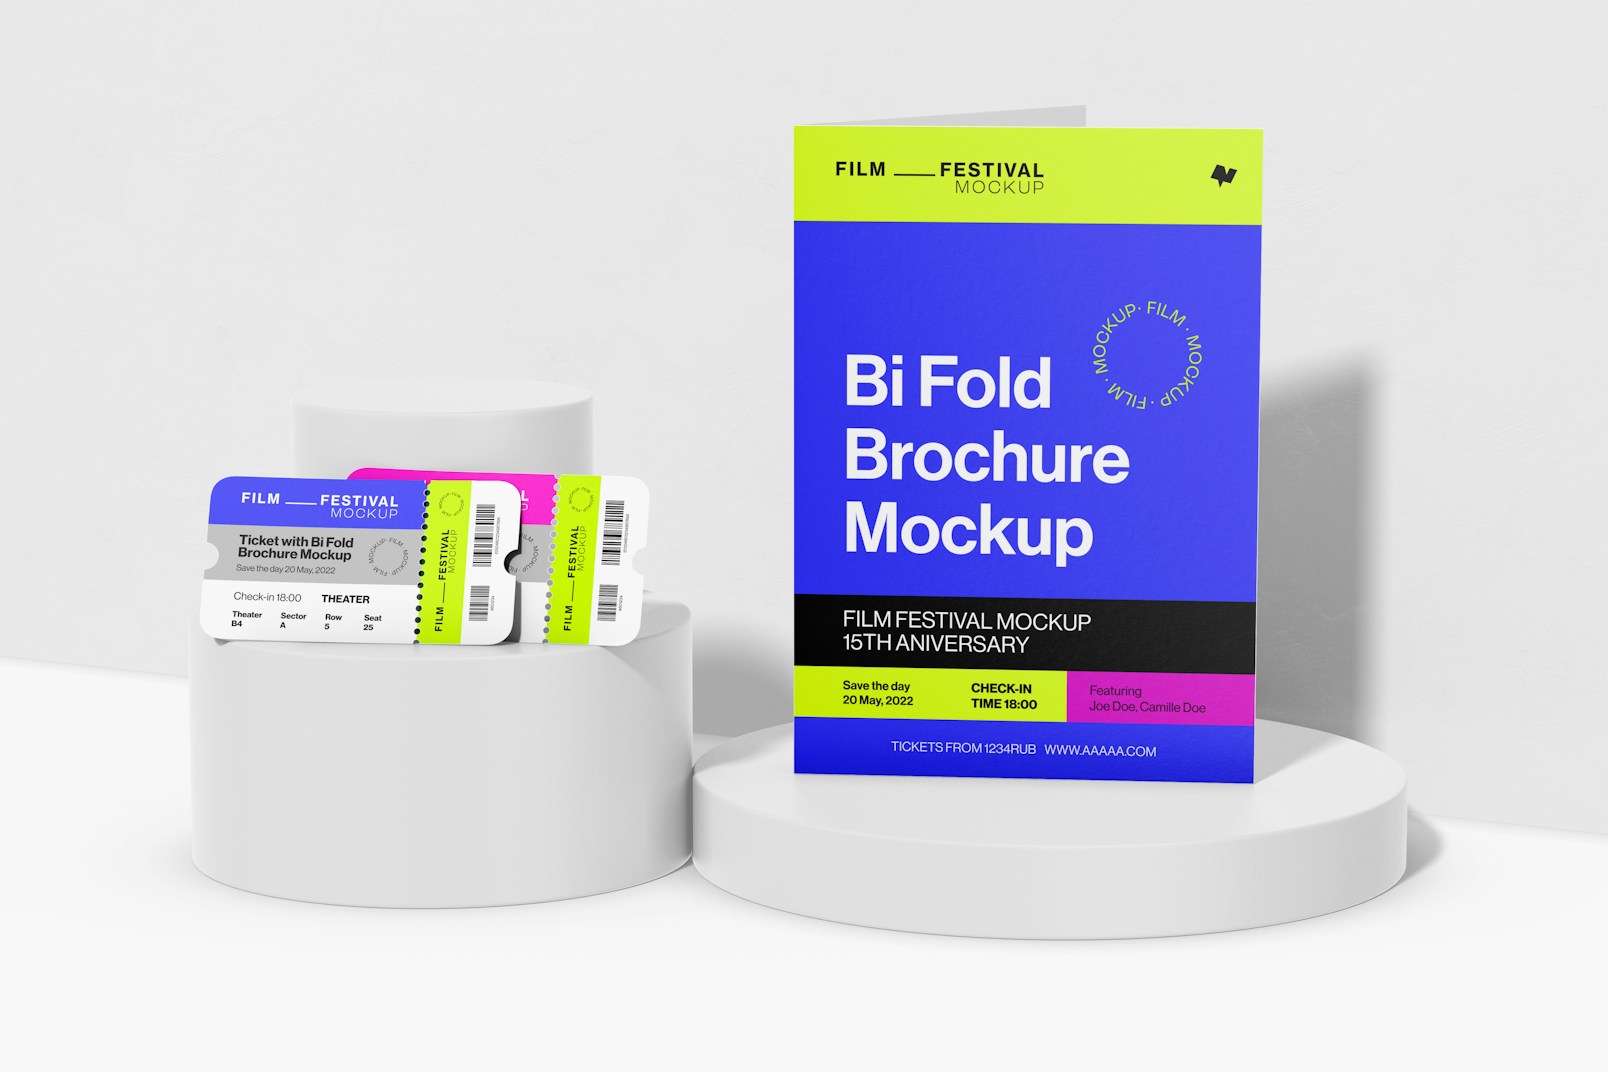 Ticket with Bi Fold Brochure Mockup, Front View